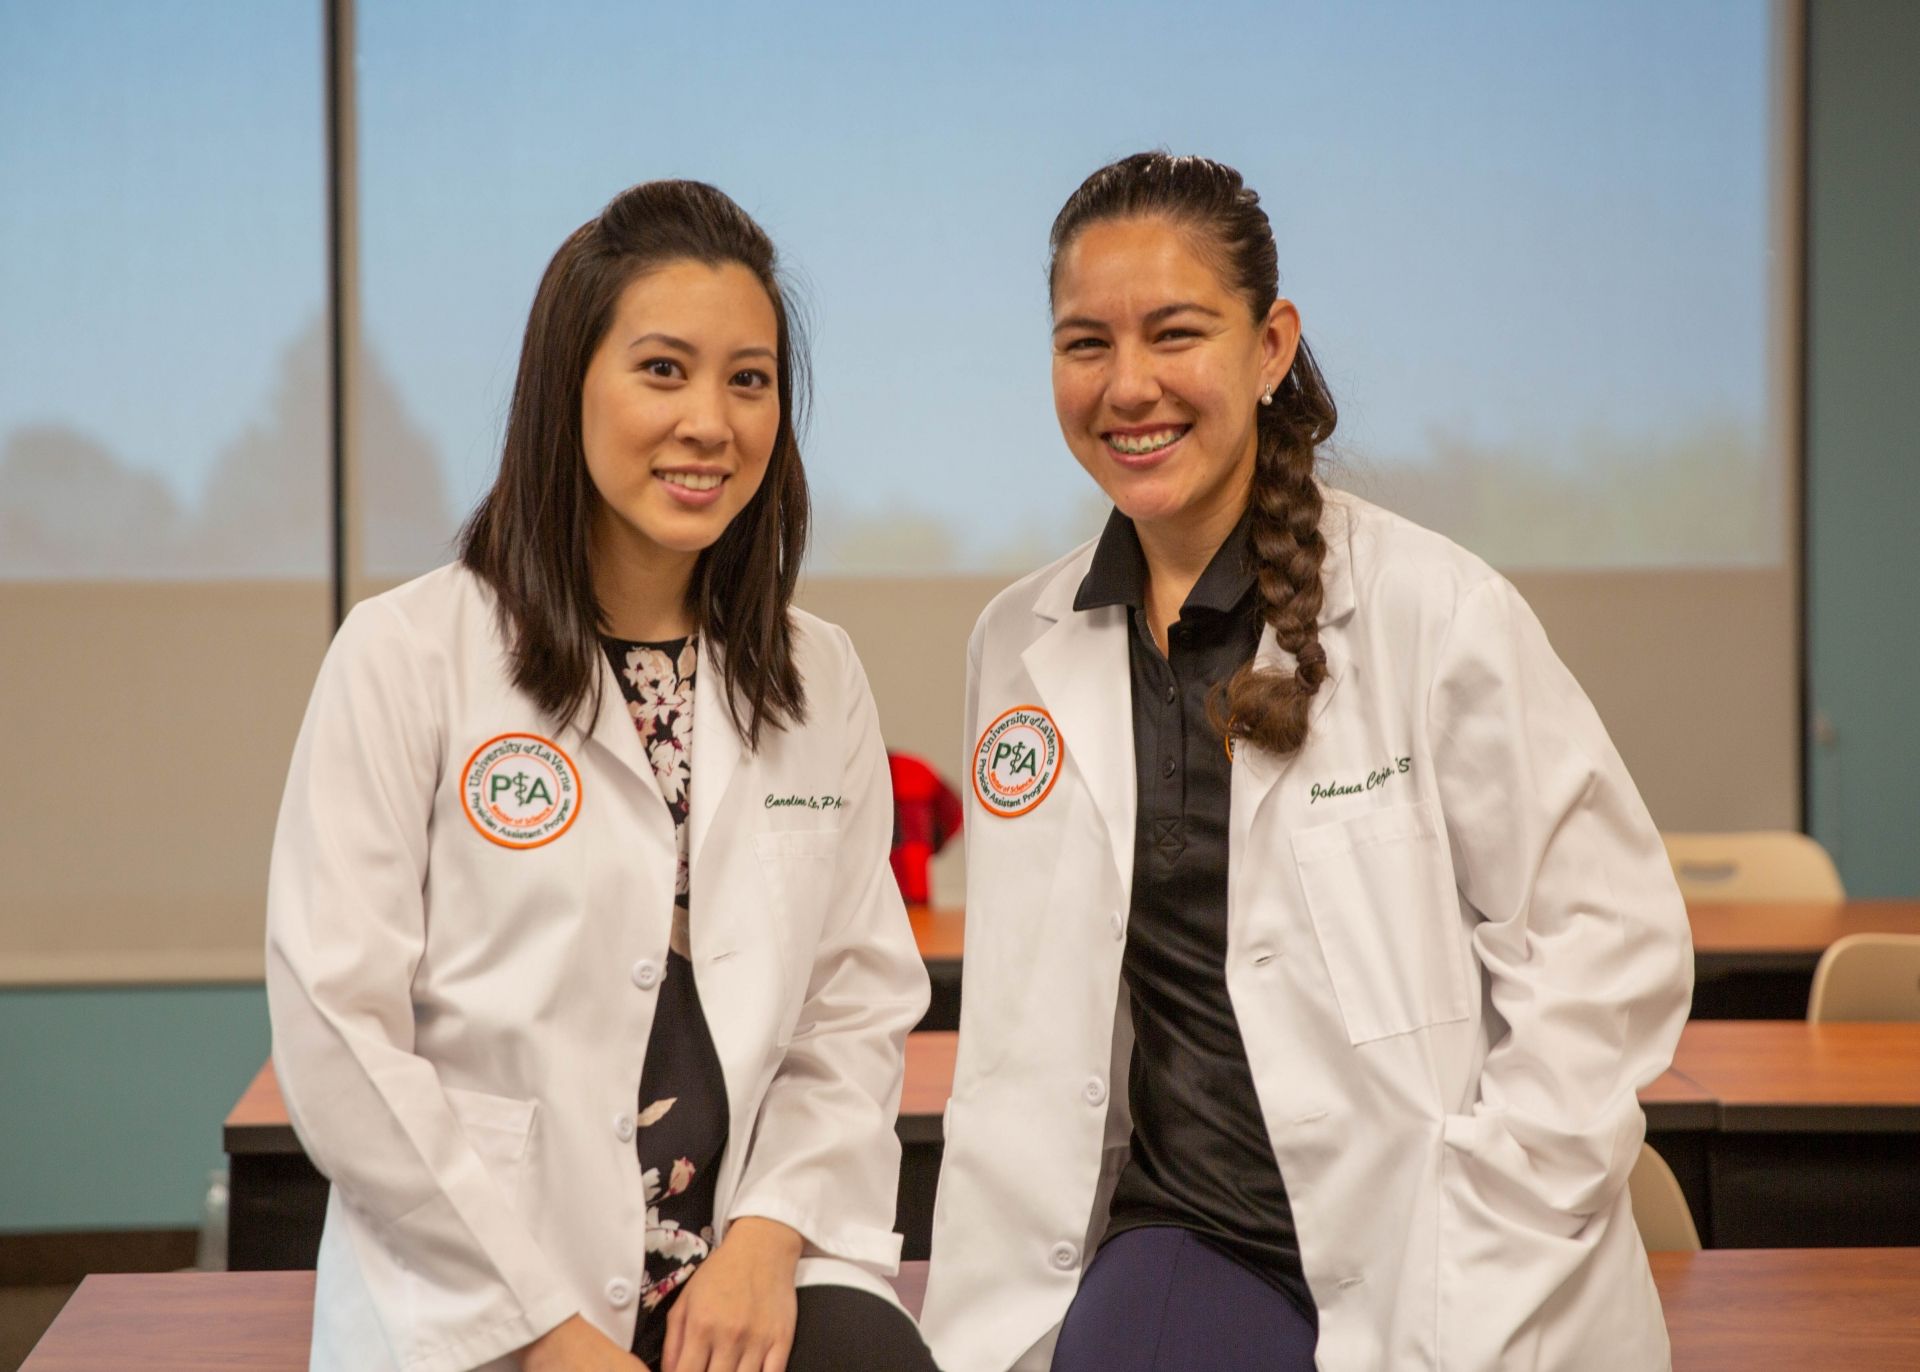 Physician Assistant Students Rise to the Challenge University of La Verne